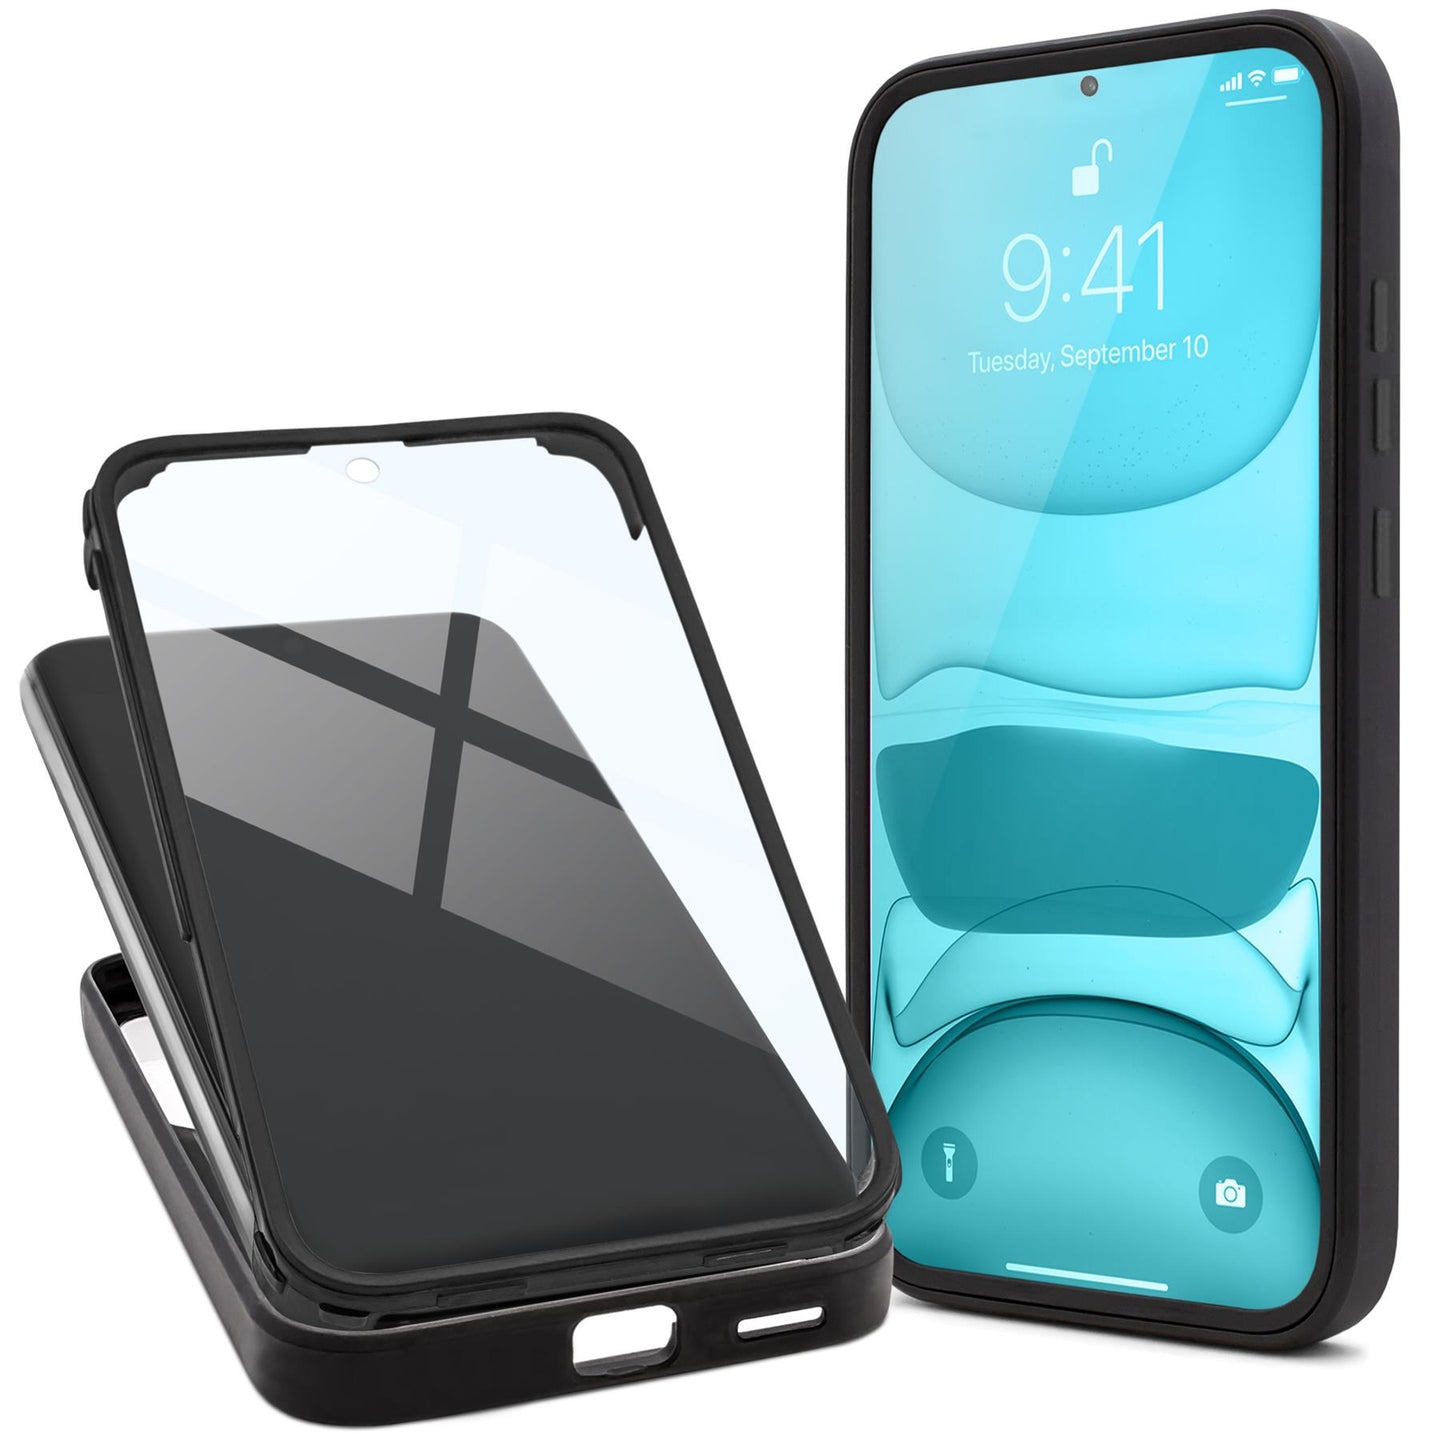 Moozy 360 Case for Xiaomi 12T and 12T Pro - Black Rim Transparent Case, Full Body Double-sided Protection, Cover with Built-in Screen Protector